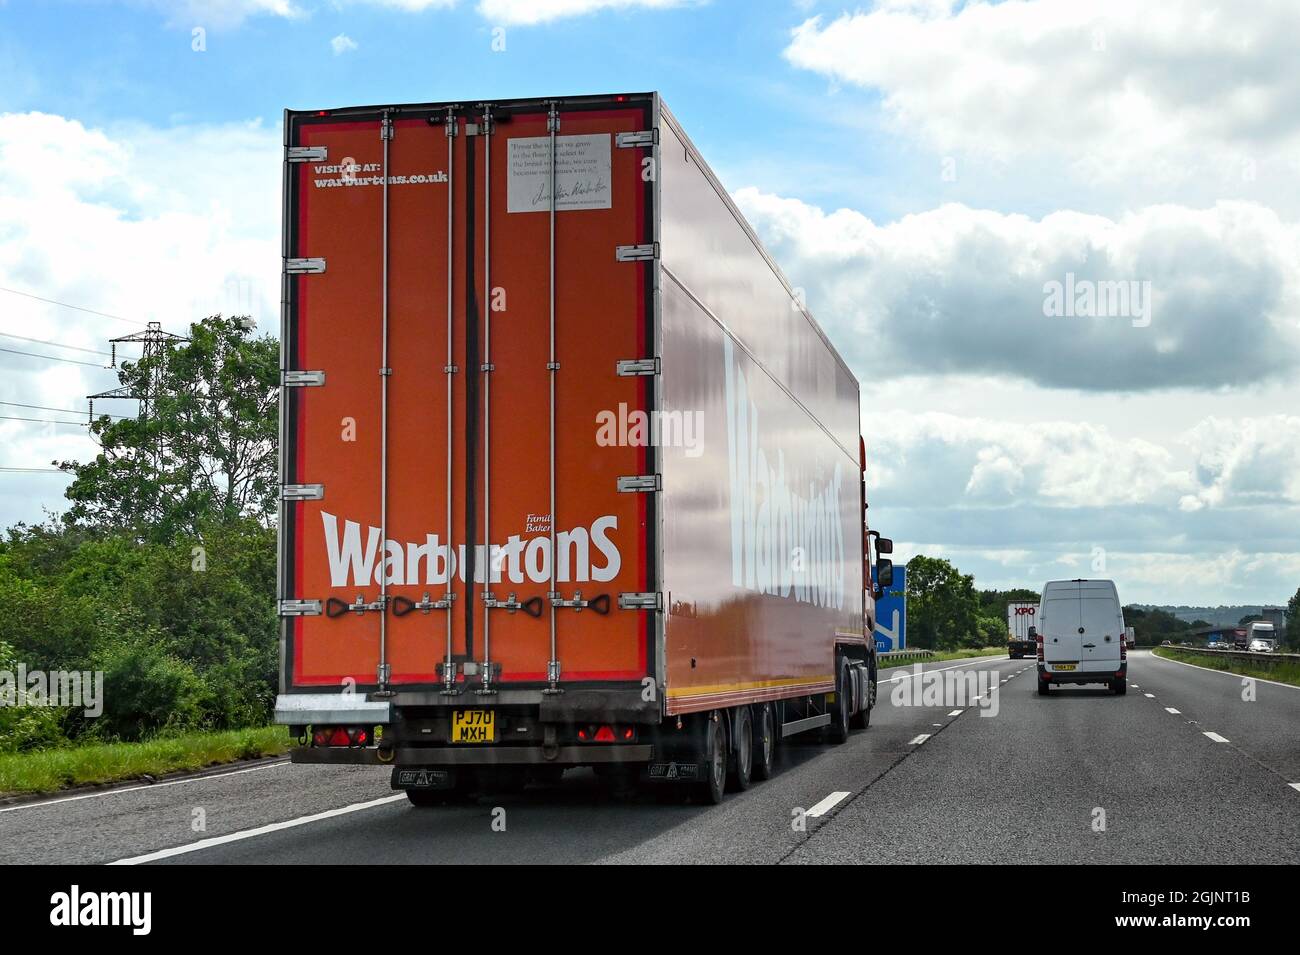 Swindon, England - June 2021: Tall box sided articulated lorry operated by bread manufacturer Warburtons driving on the M4 motorway Stock Photo